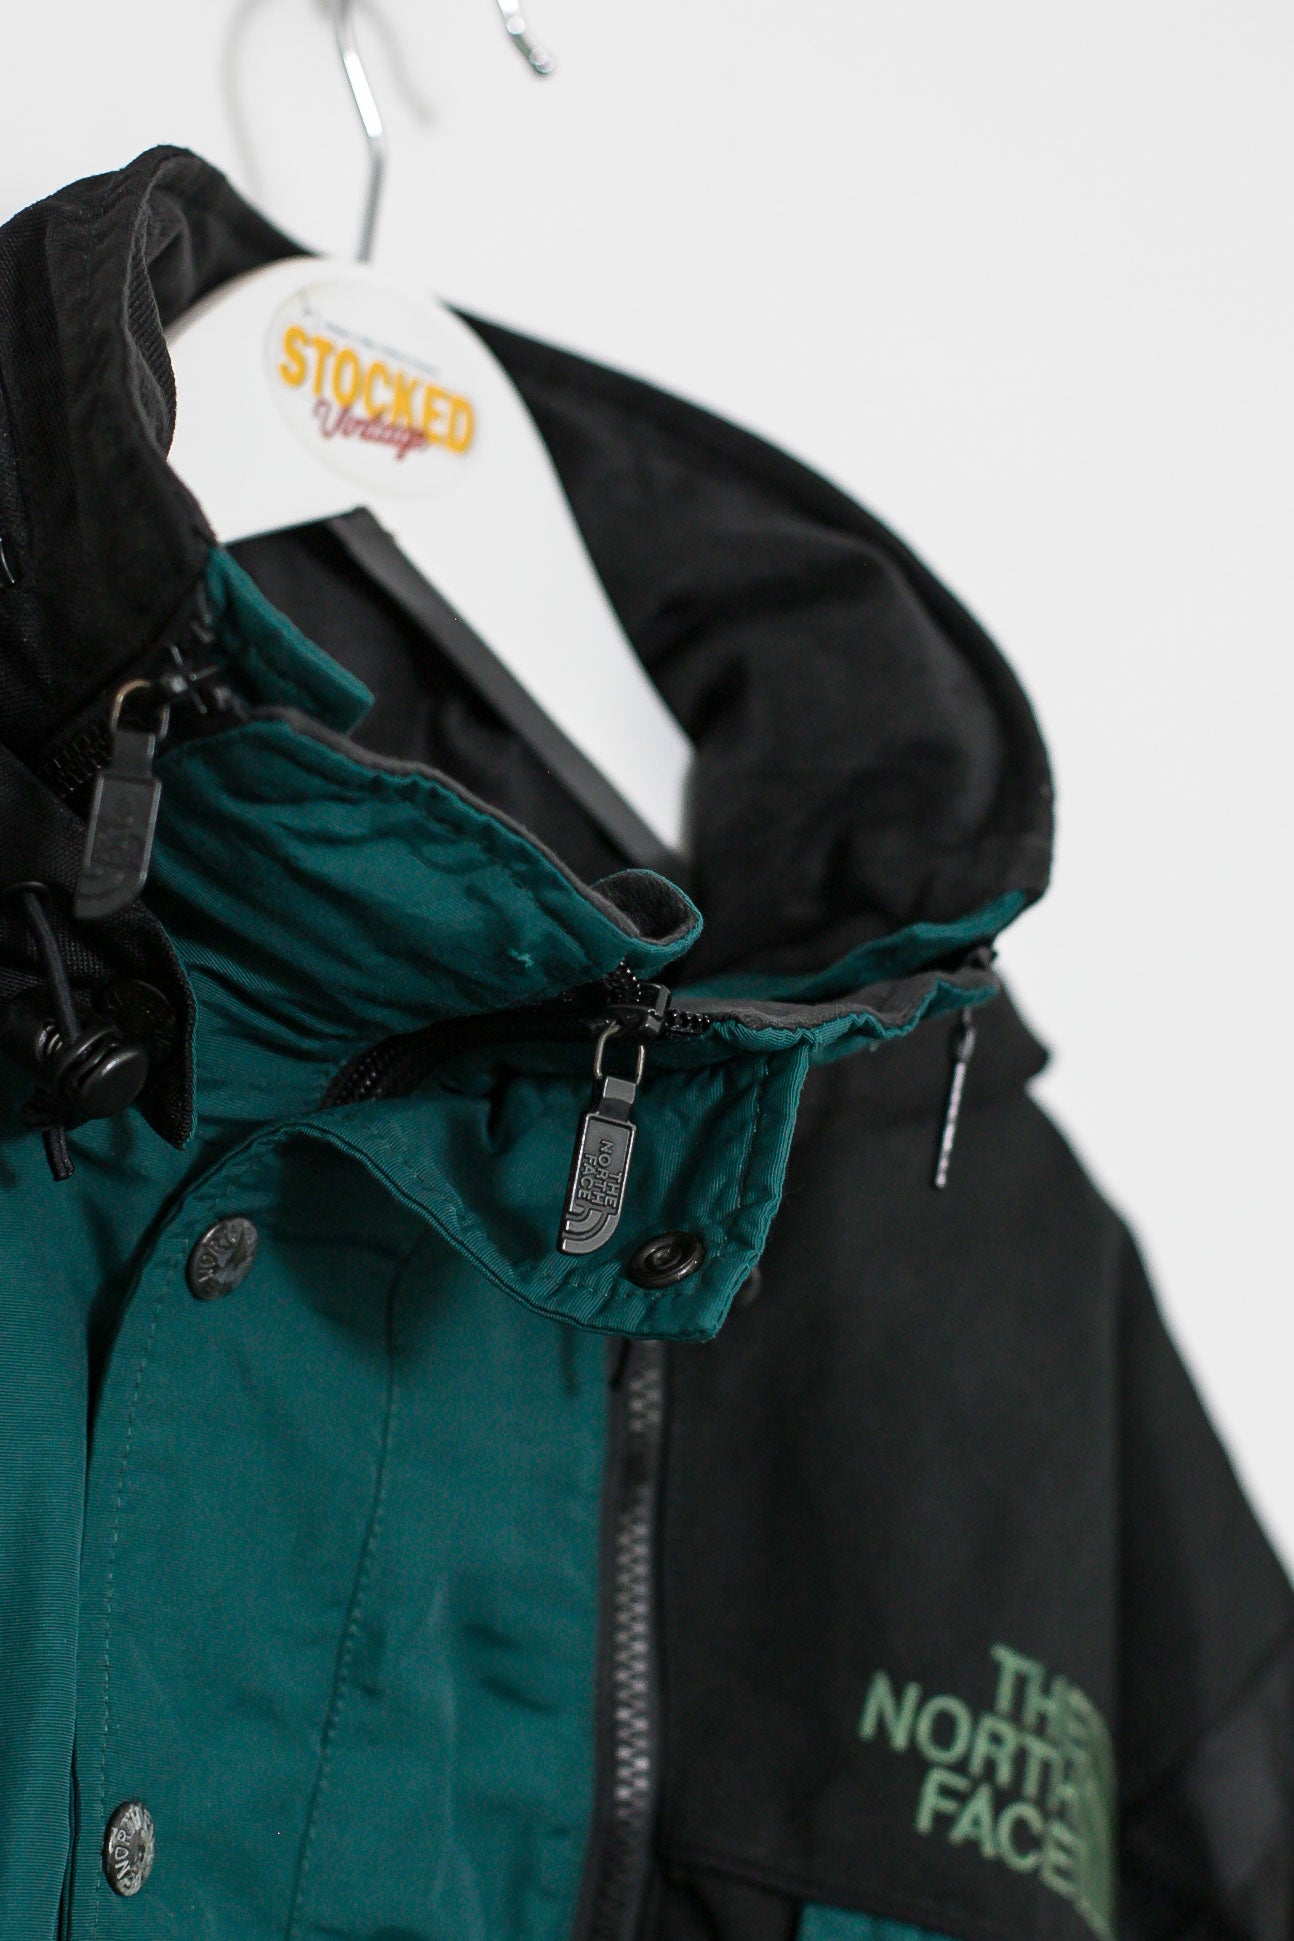 Rare 90s The North Face Steep Tech Jacket (L) – Stocked Vintage